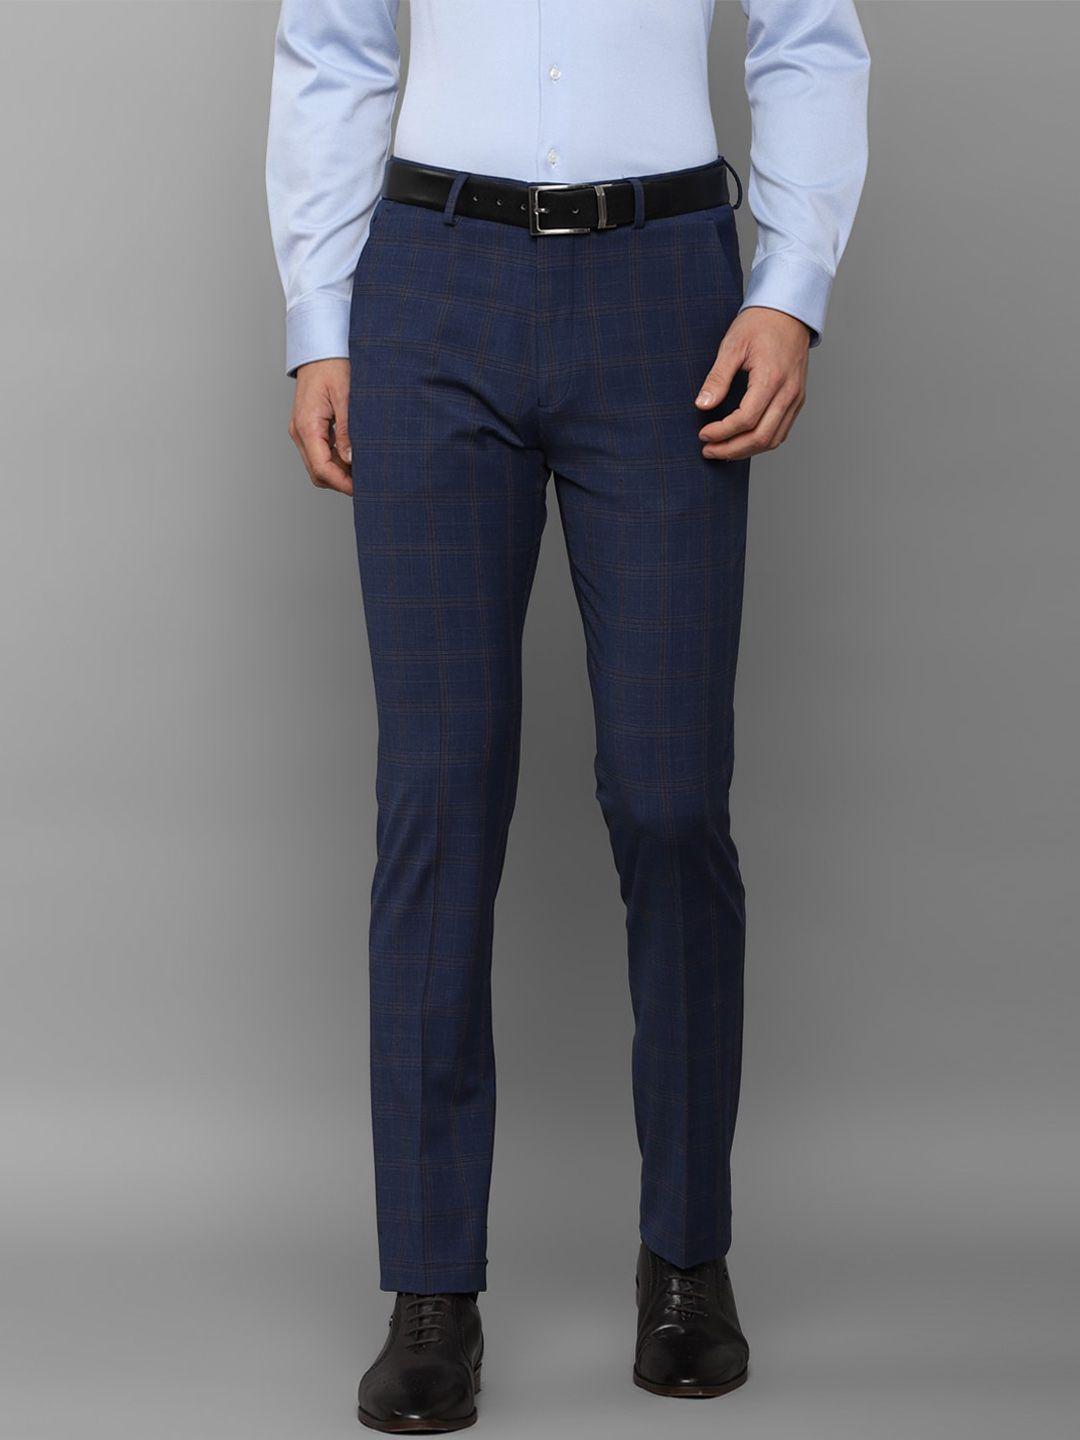 louis philippe men navy blue checked slim fit trousers